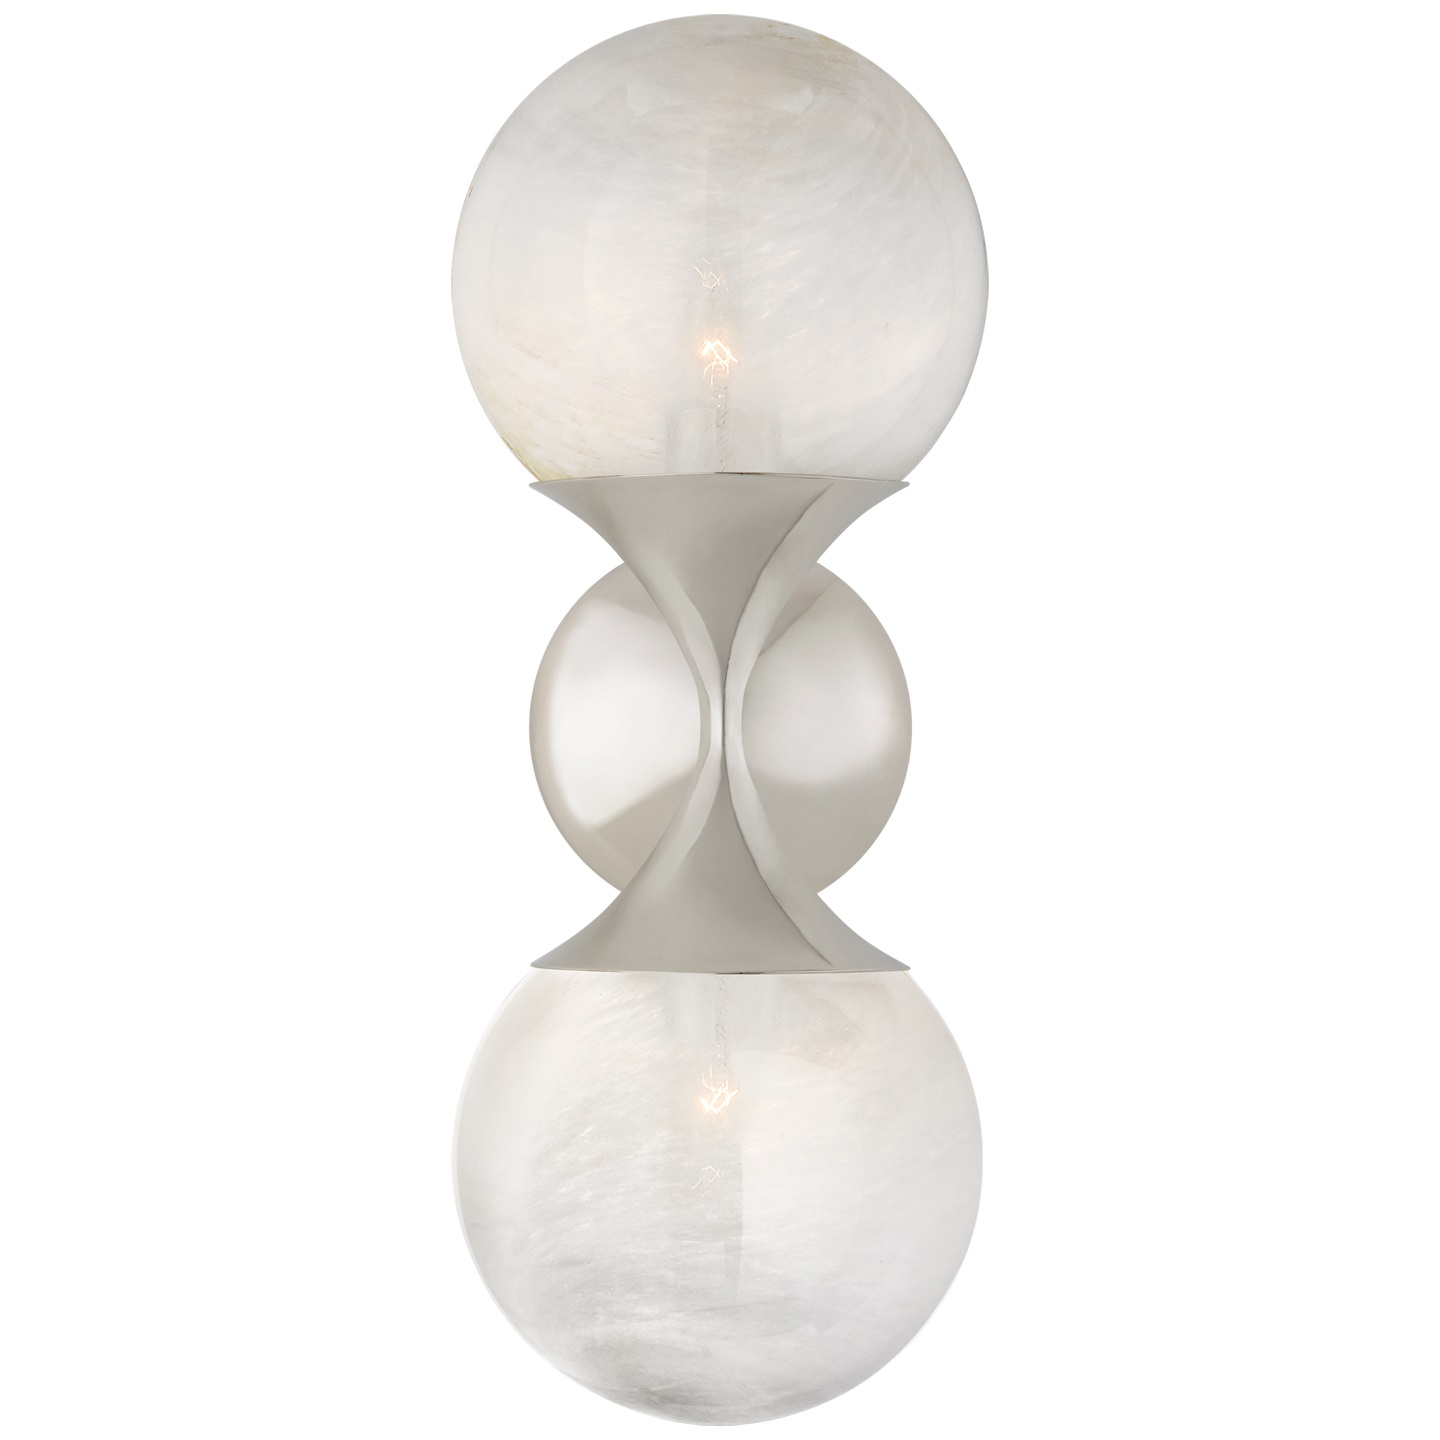 Cristol Small Double Sconce